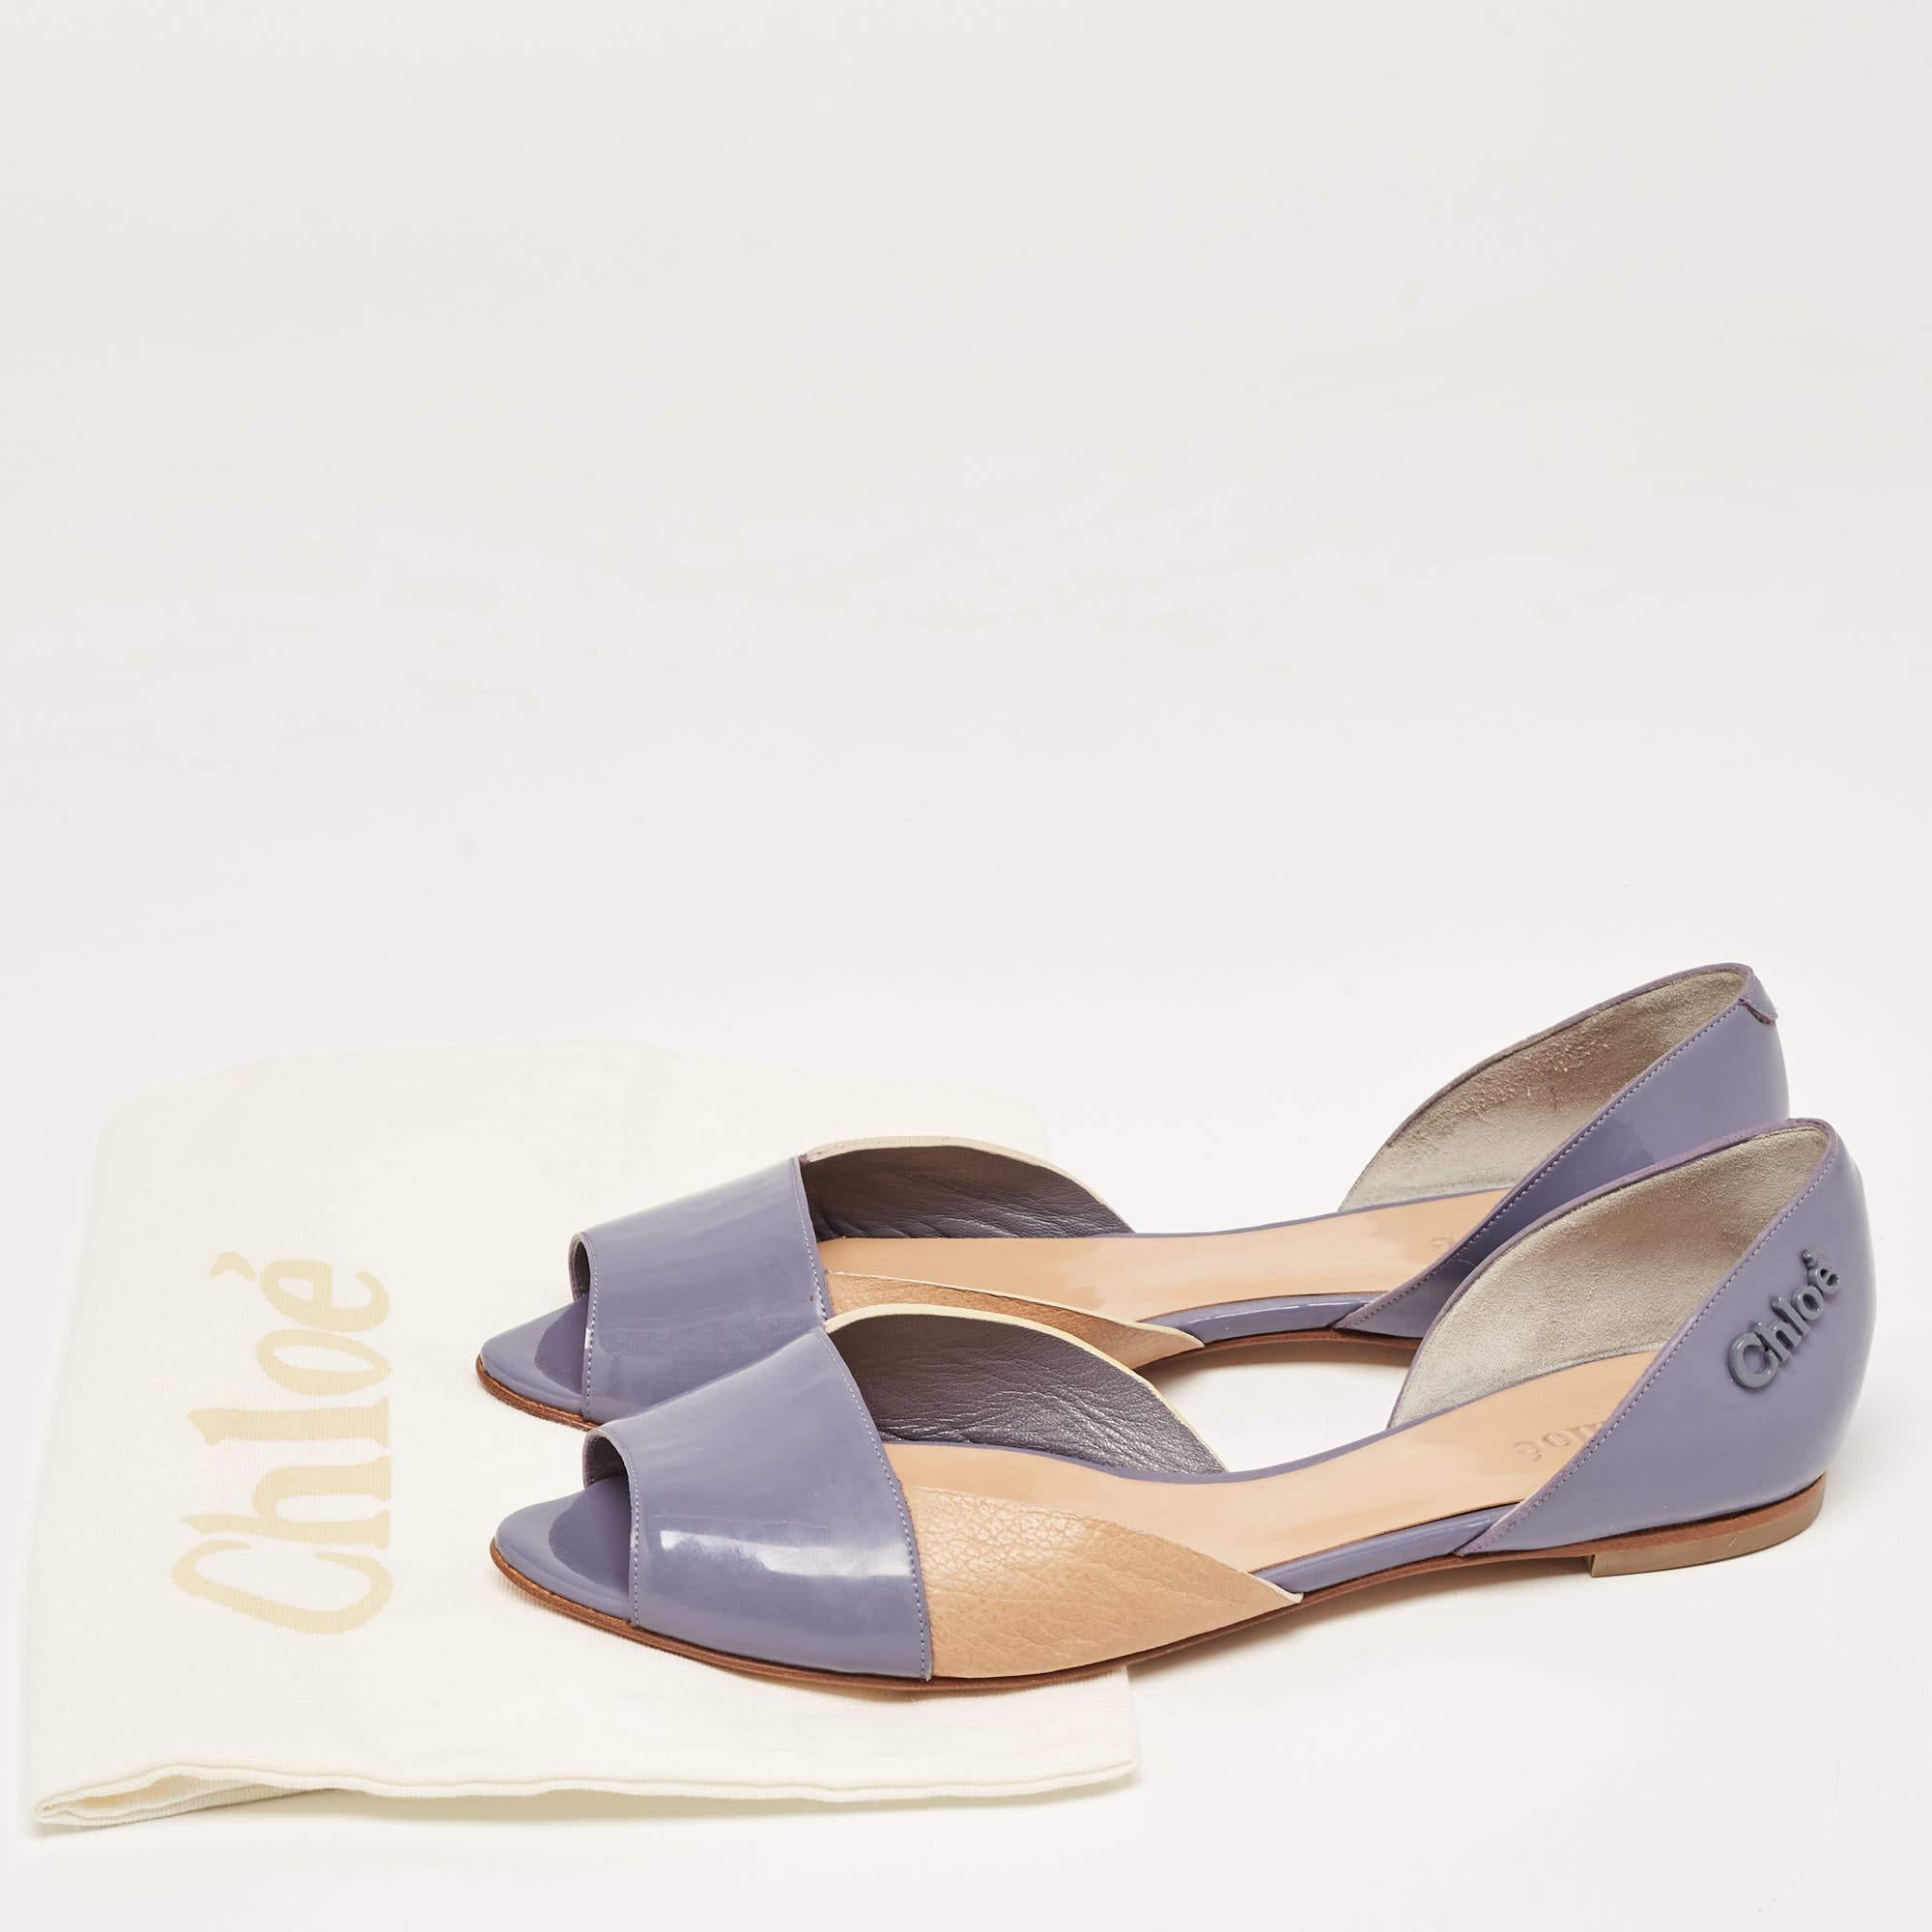 Chloé Blue/Brown Leather Open Toe D'orsay Flats Size 38 4